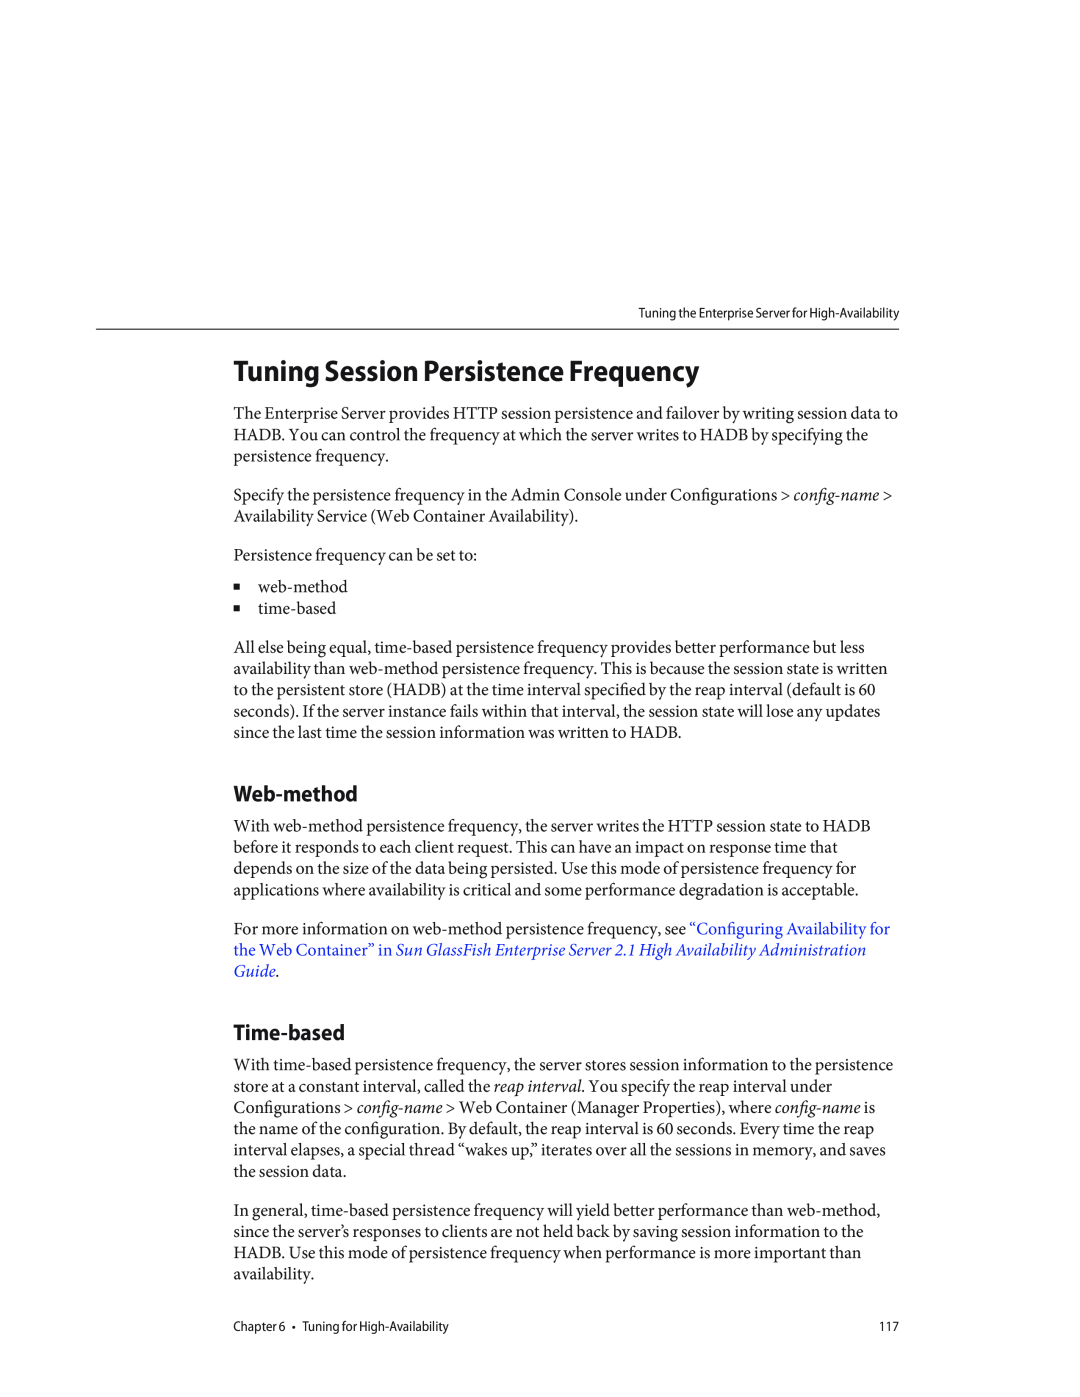 Sun Microsystems 820434310 manual Tuning Session Persistence Frequency, Web-method, Time-based 